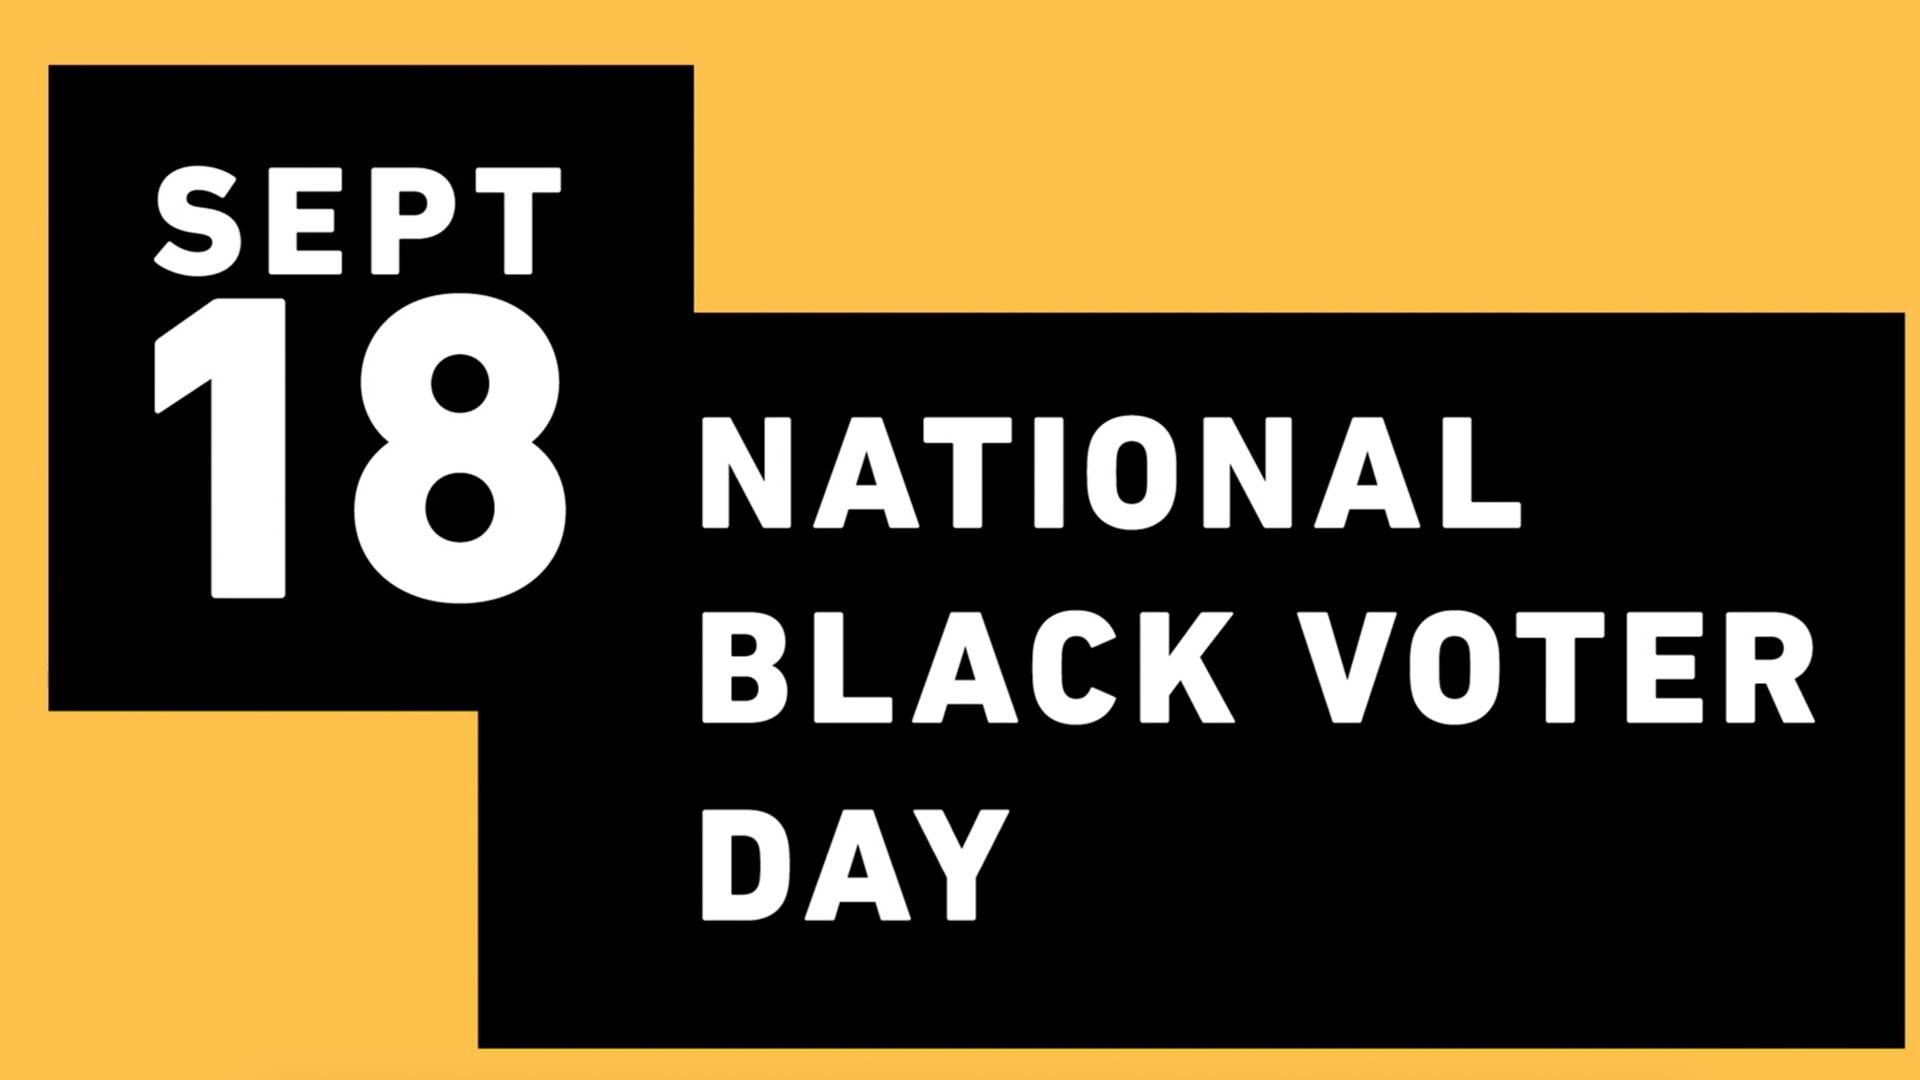 Reclaim Your Vote says when National Black Voter Day is on BET 2020.